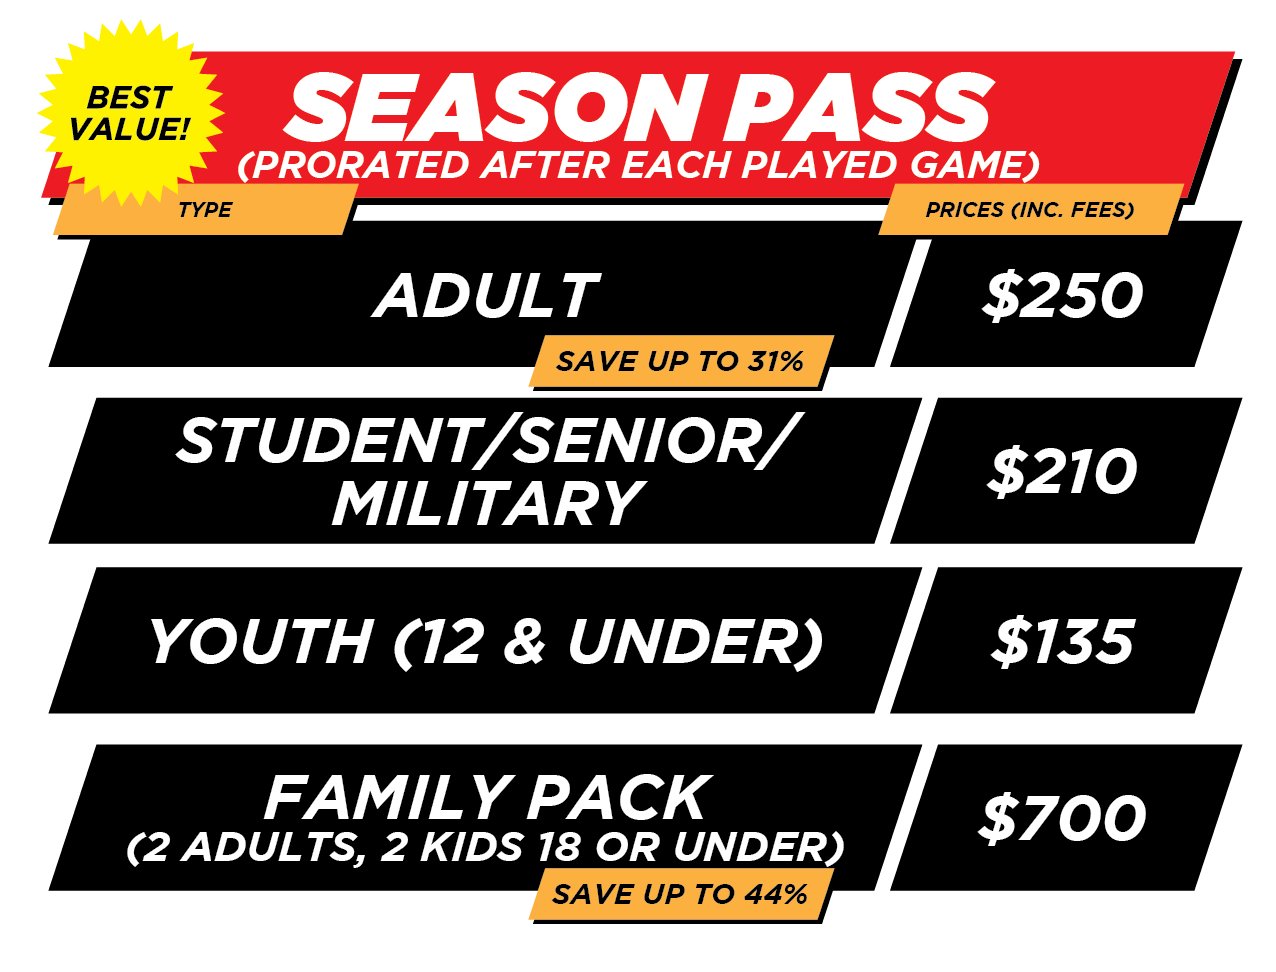 PRICING FOR WEBSITE SEASON PASS